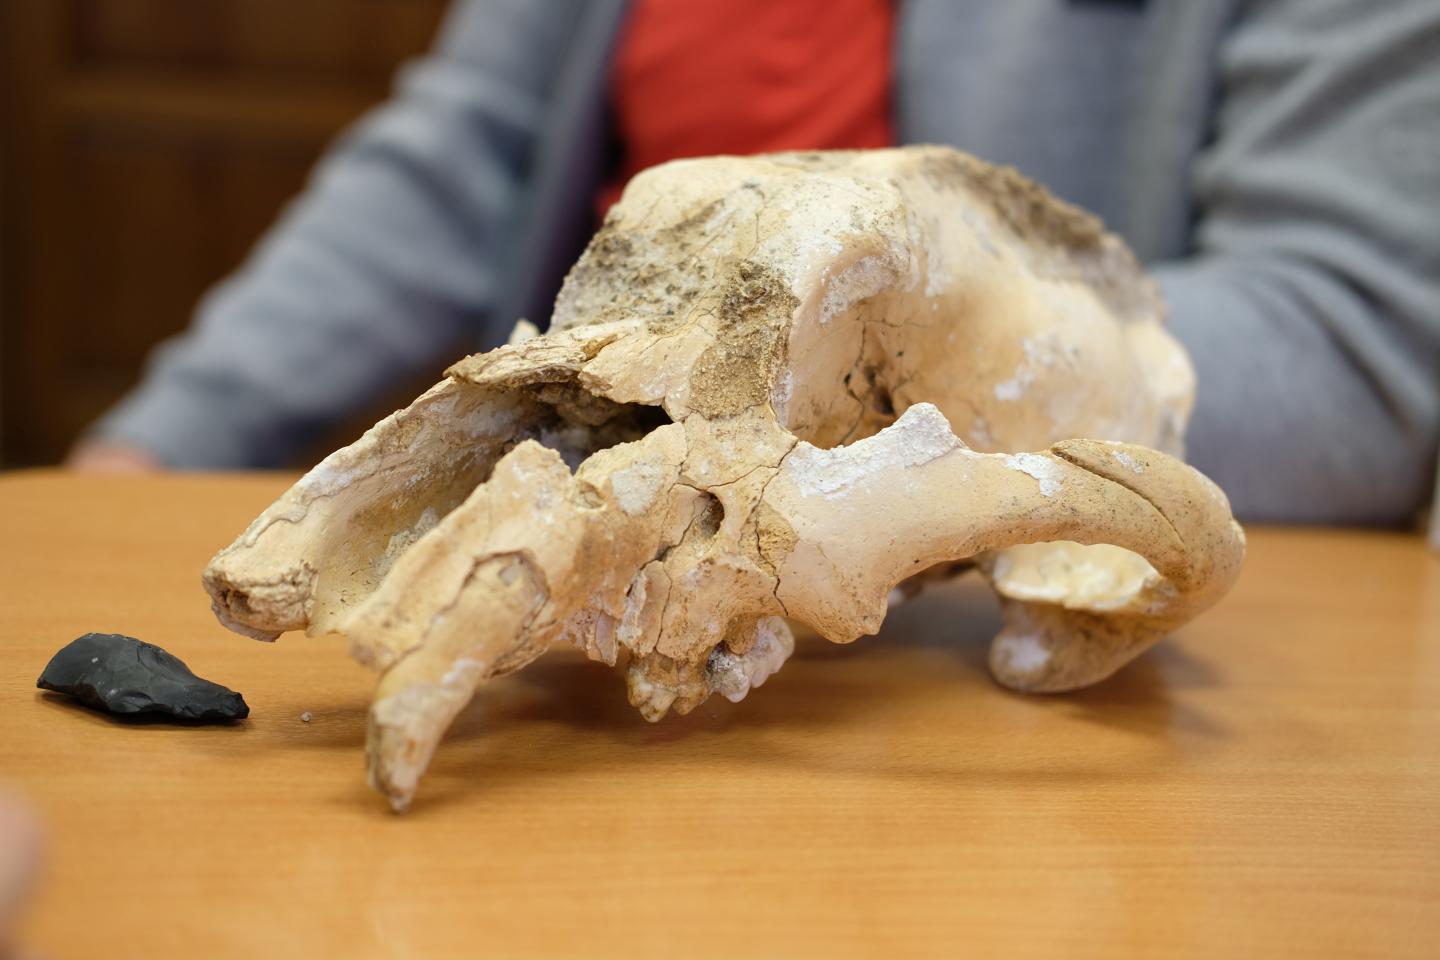 The skull of a small cave bear and a replica of the arrowhead (left)